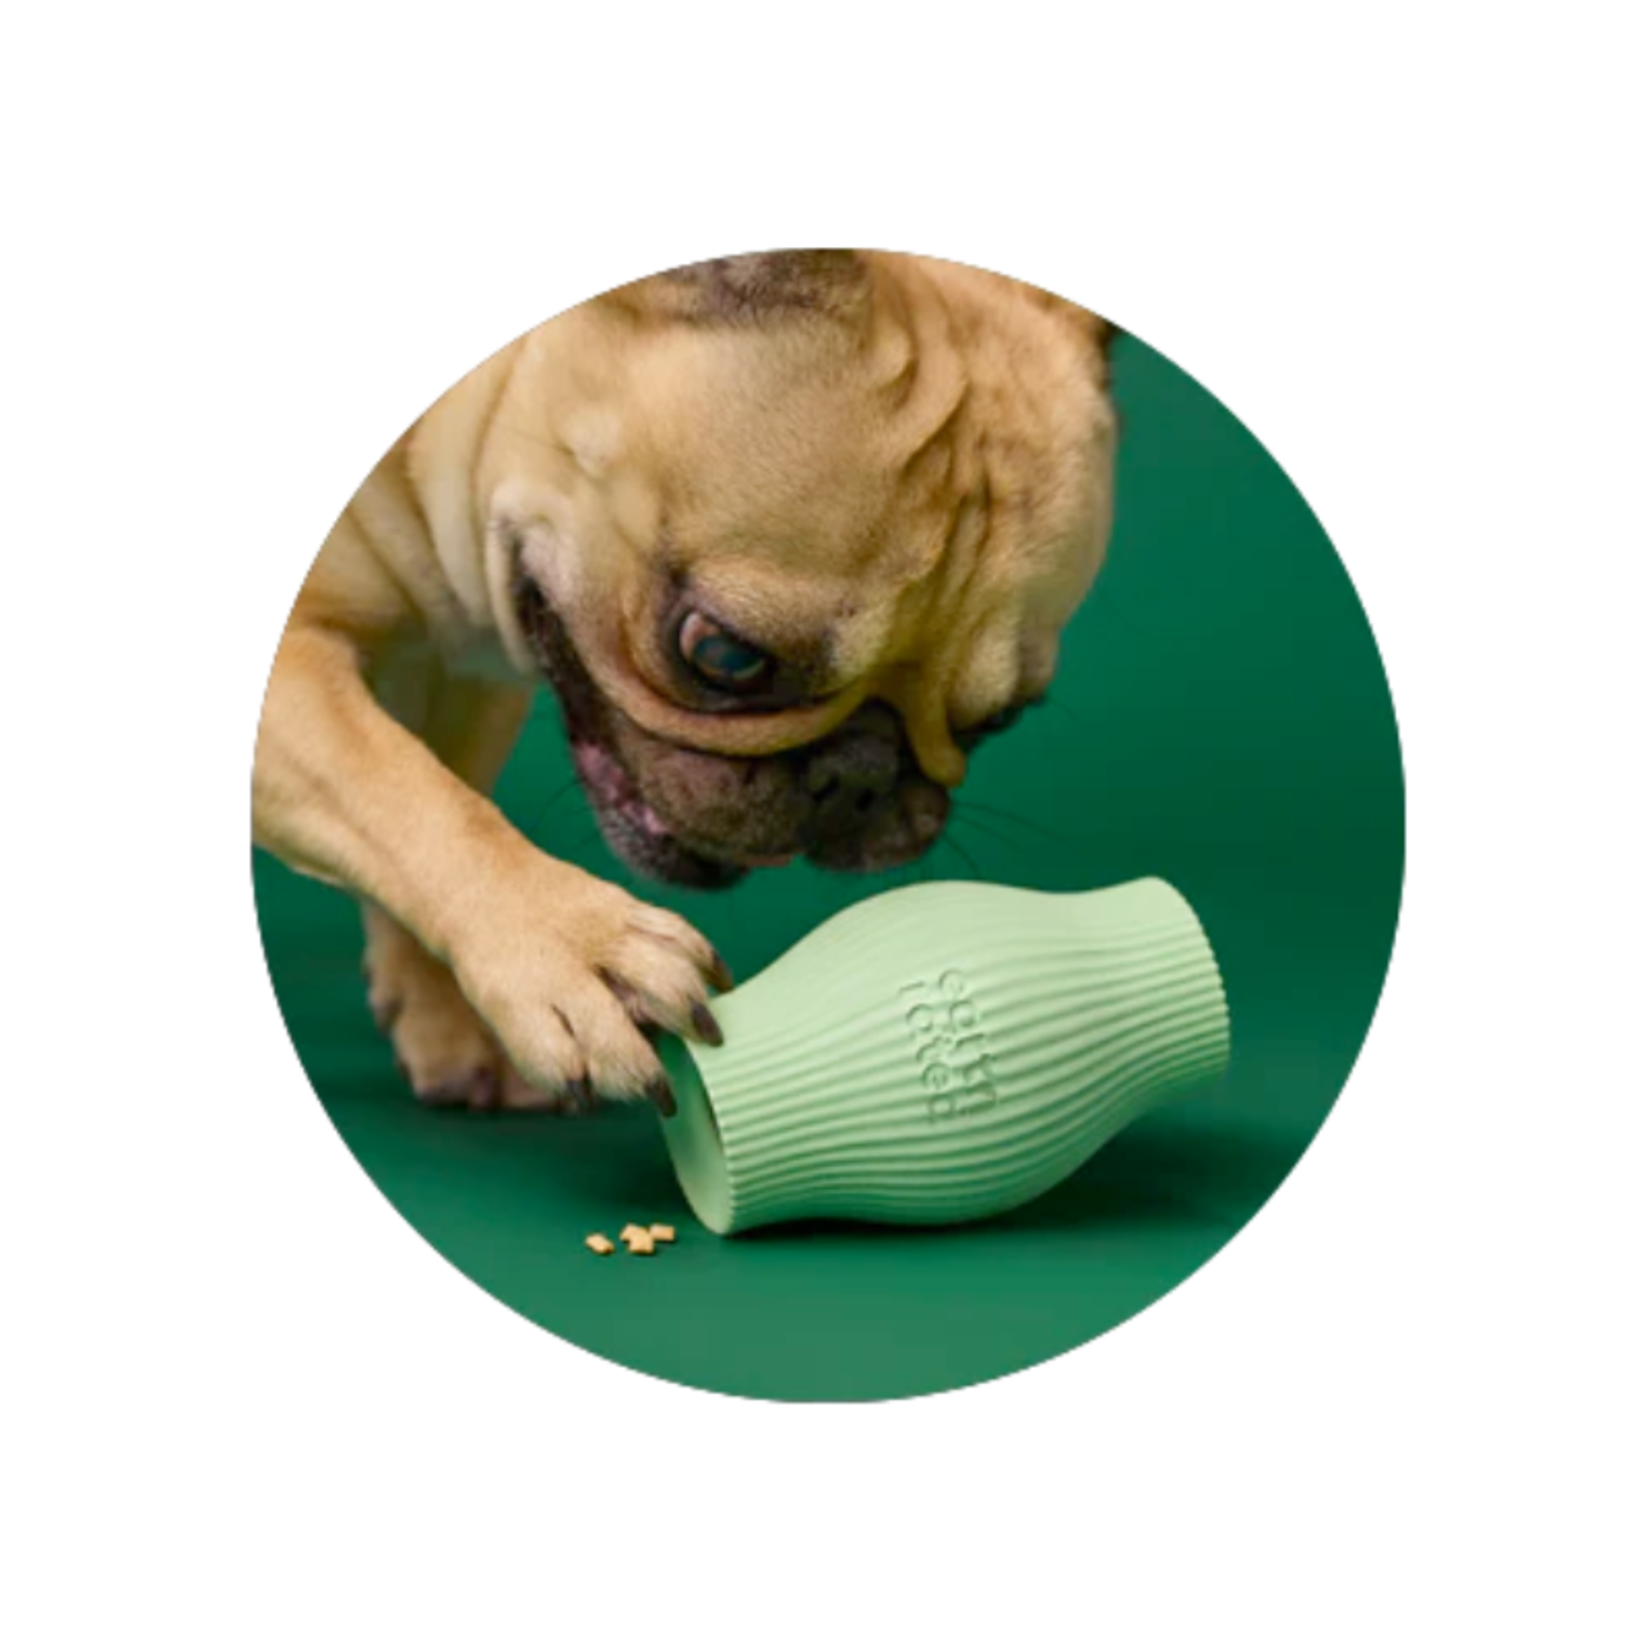 Earth Rated Treat Toy - Natural Rubber - Earth Rated